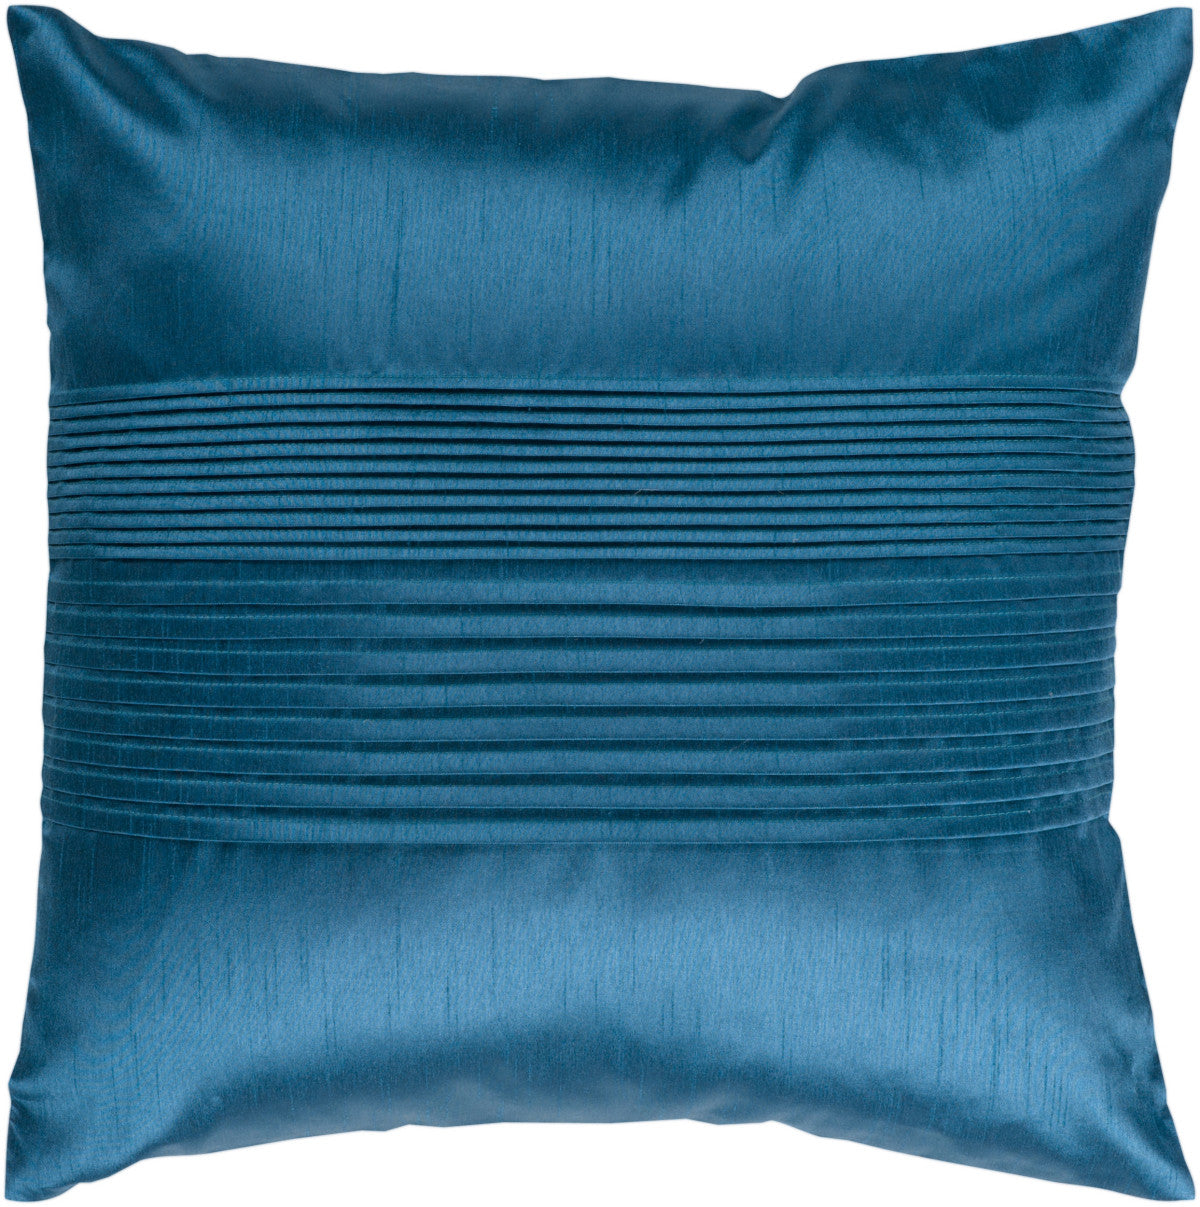 Surya Solid Pleated Lori Lee HH-024 Pillow